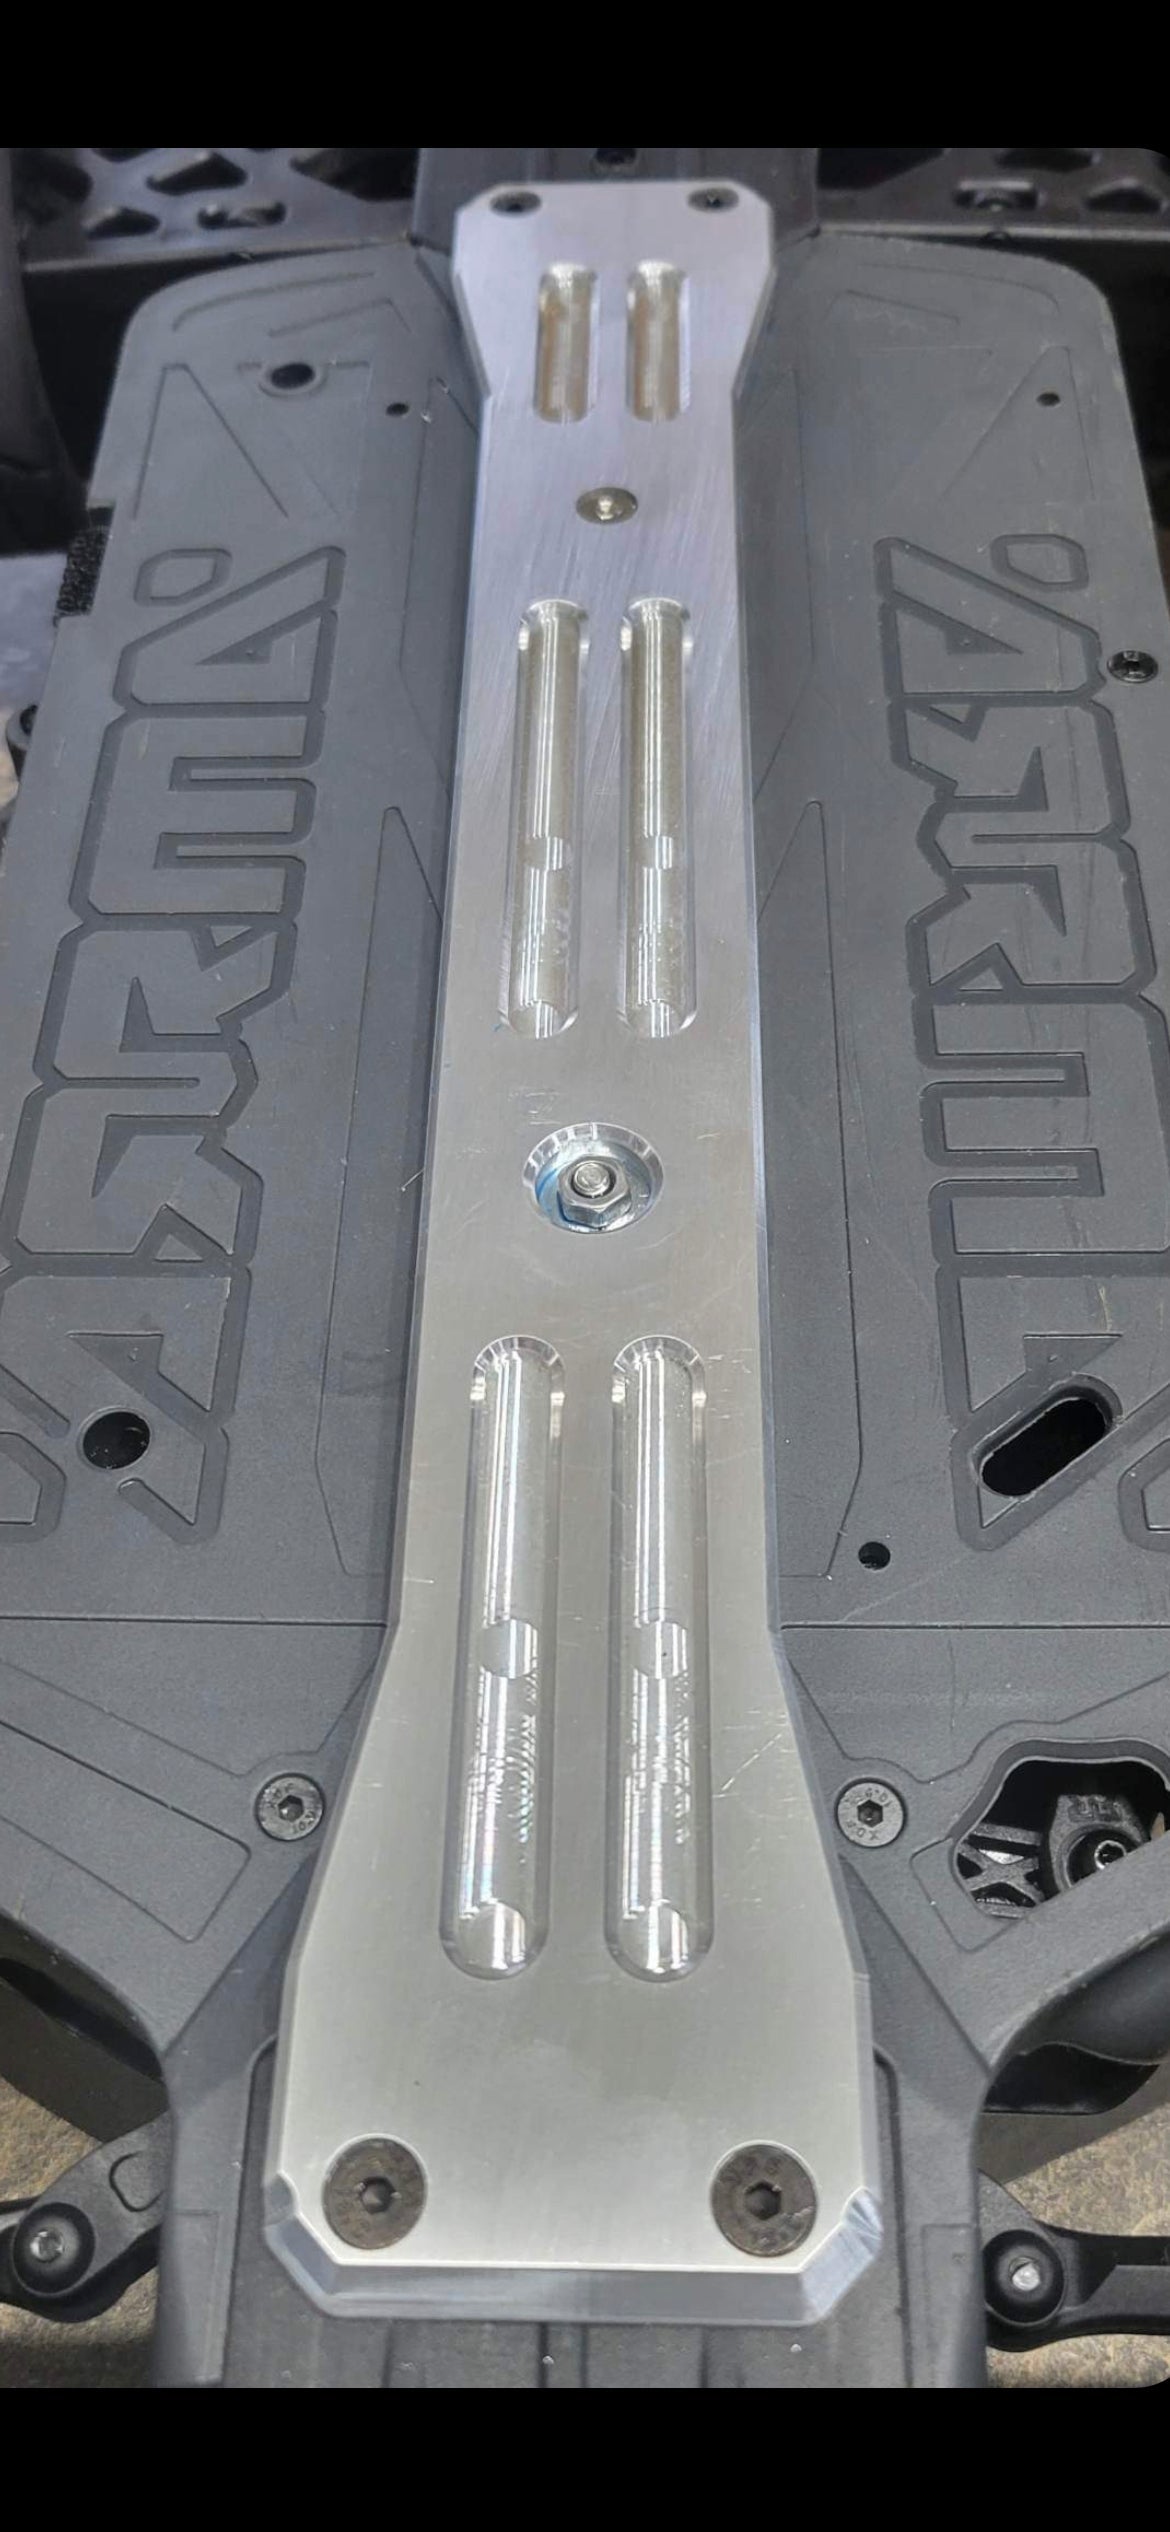 KC RC Skid plate 7075 T6 ( 6.35mm ) for Outcast 4s v2